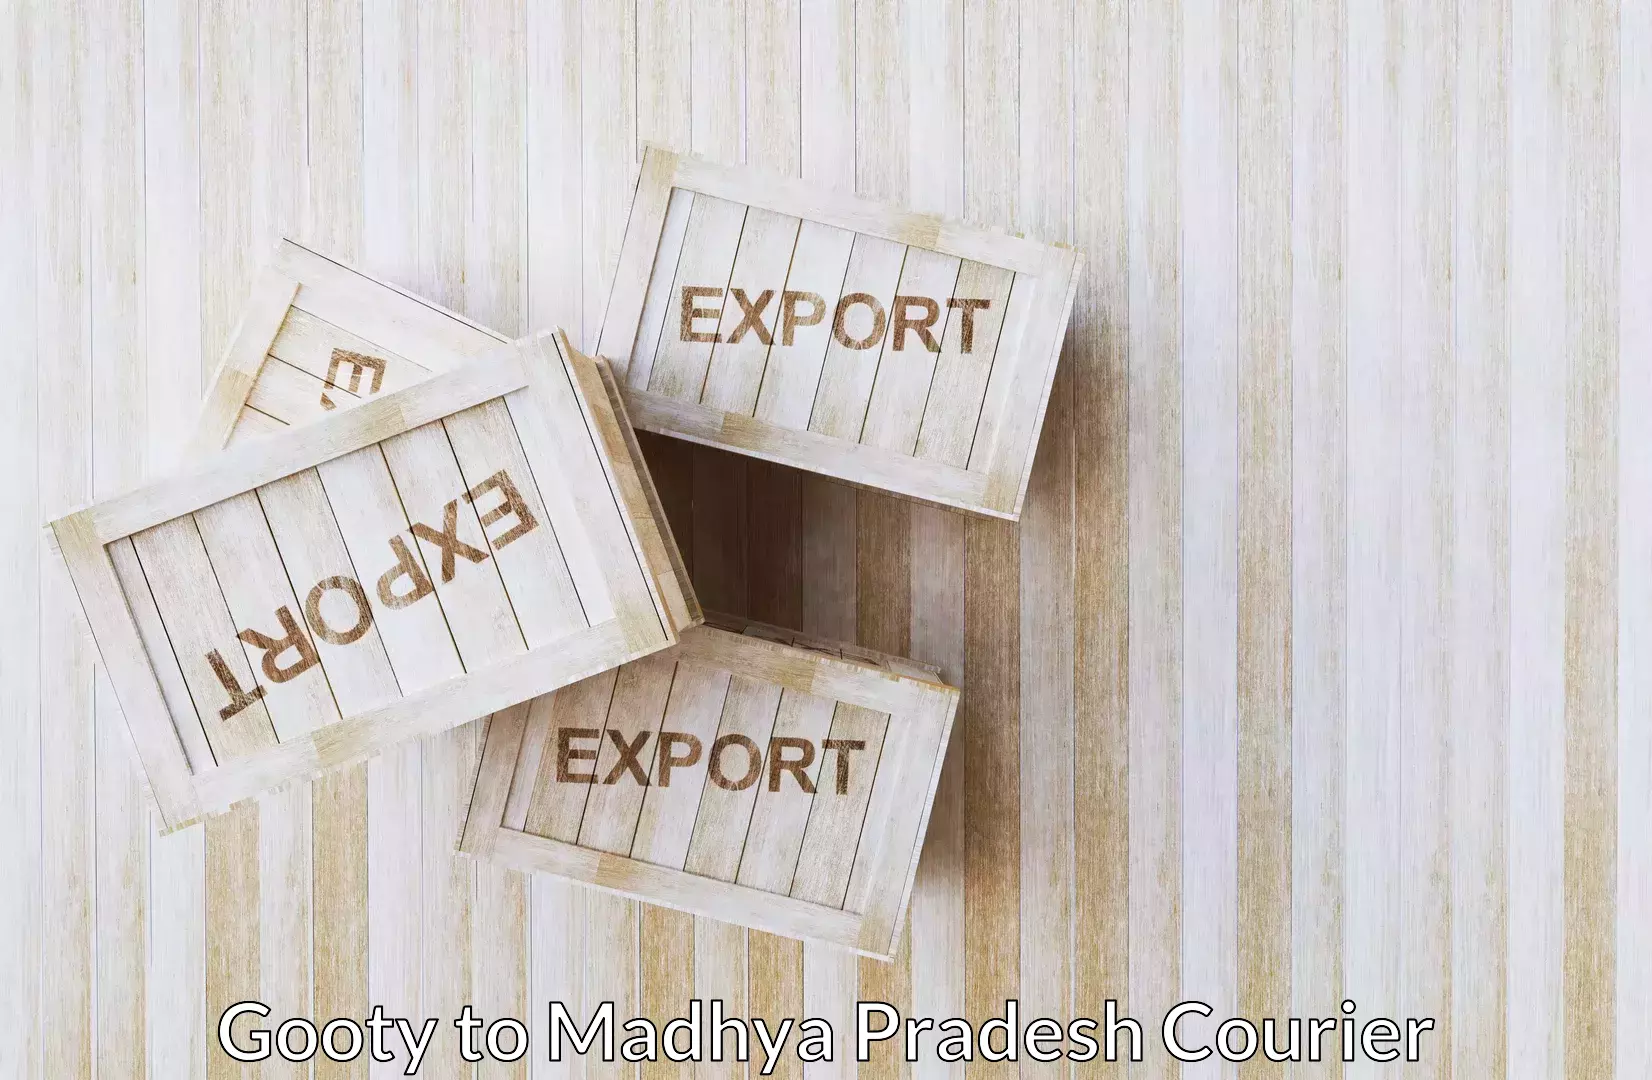 Professional moving company Gooty to Gwalior